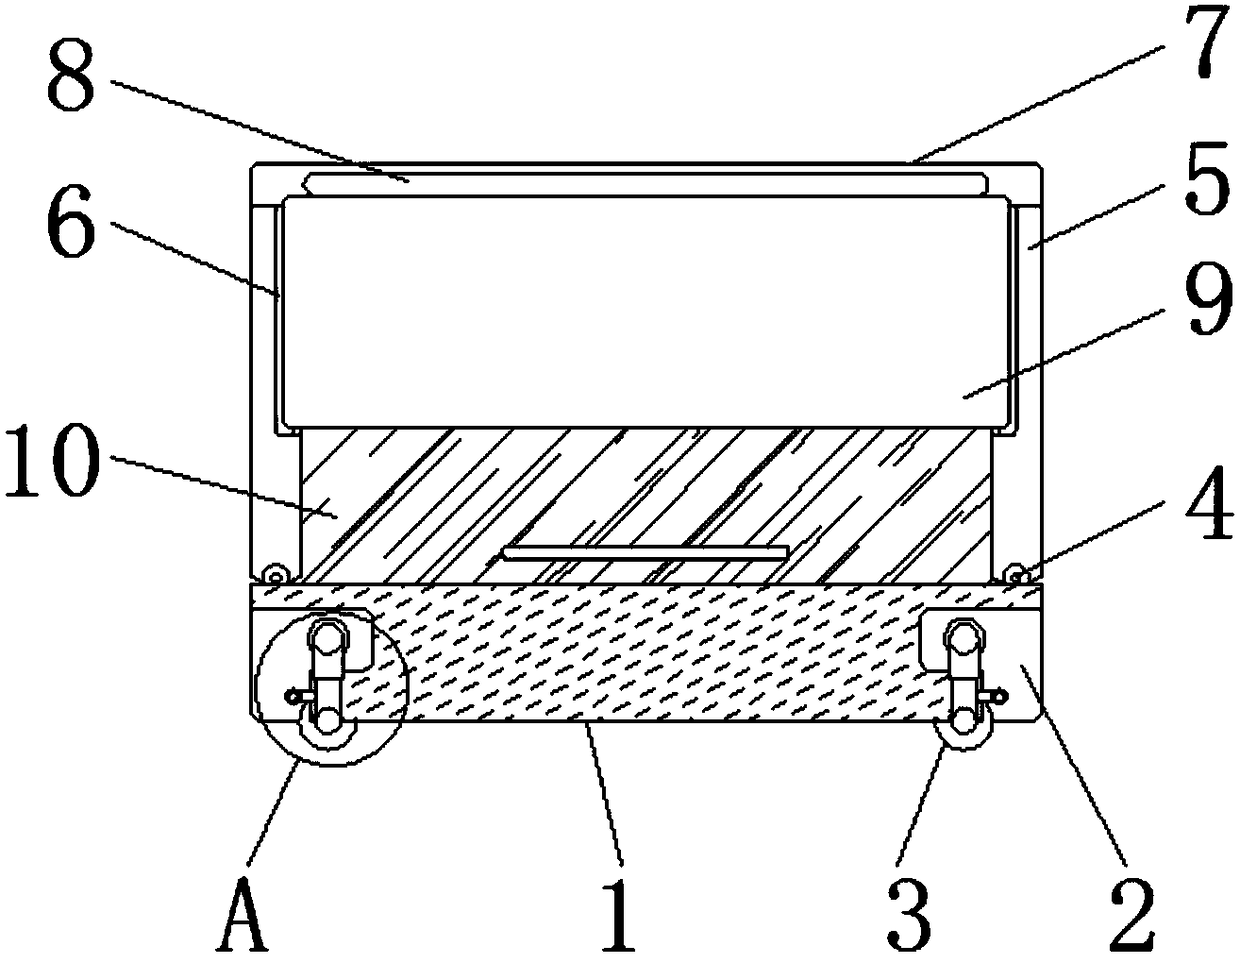 Transporting and fixing device capable of moving conveniently for selling of 3D printer